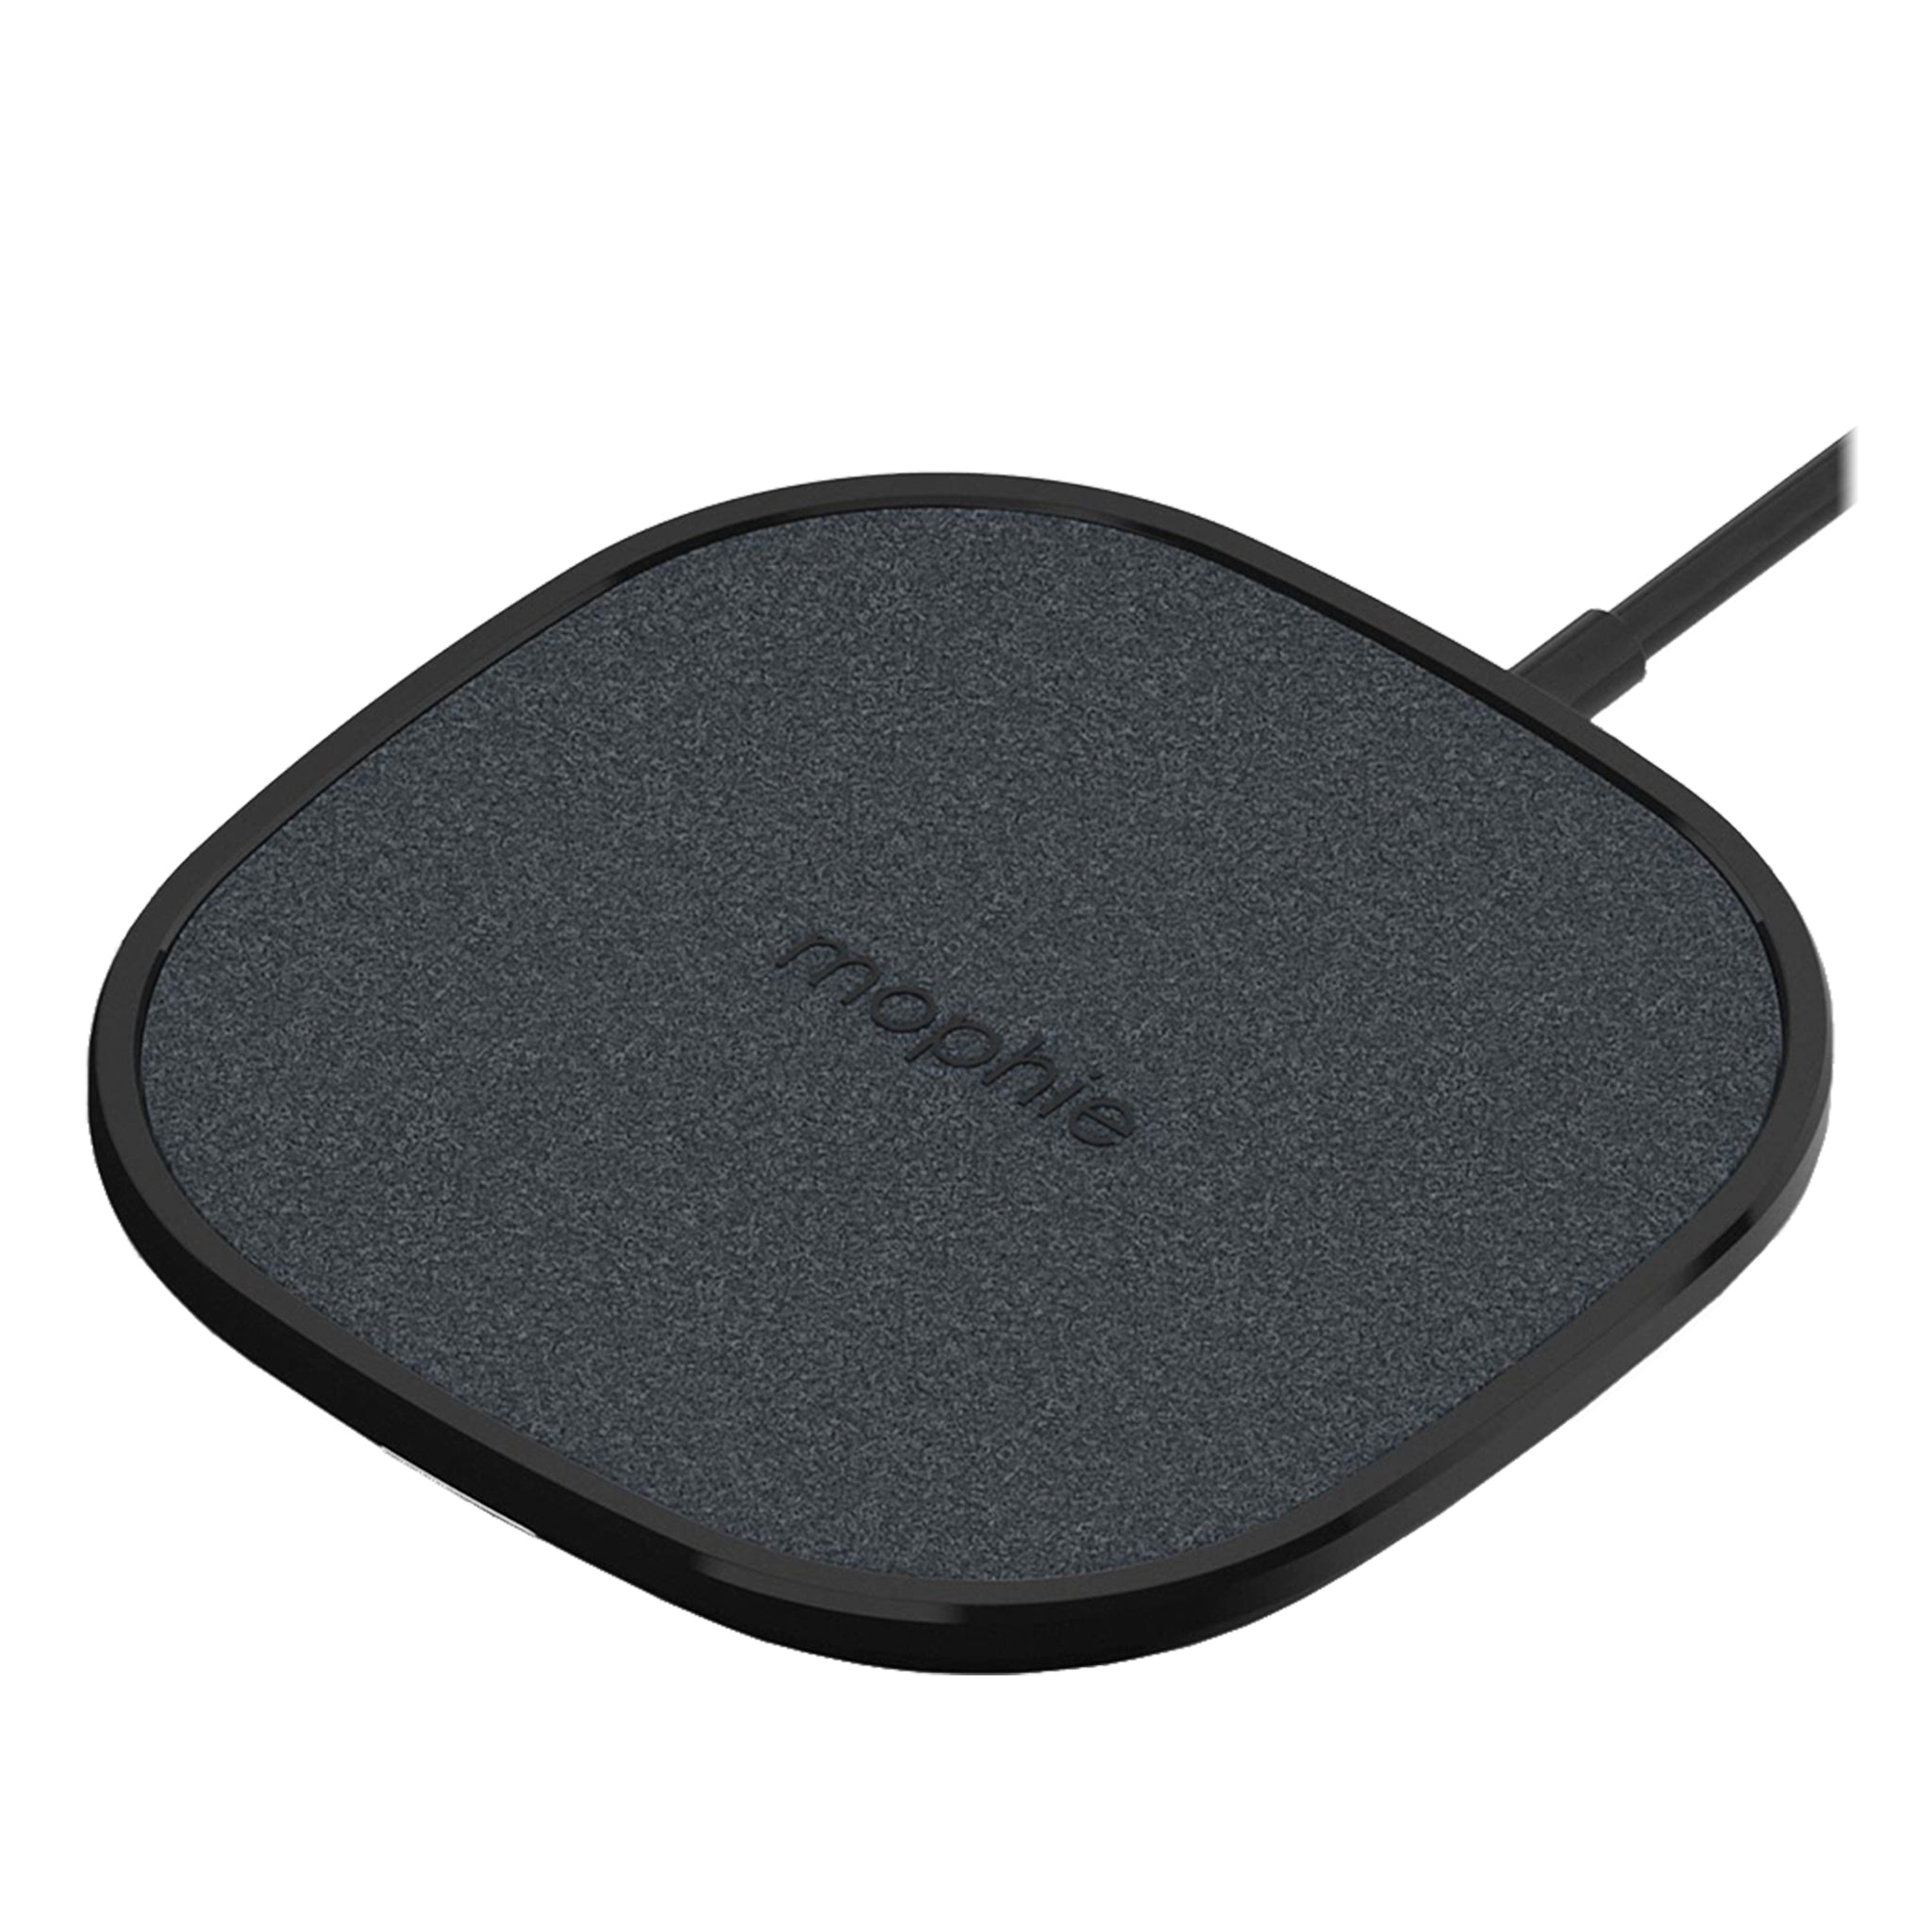 Mophie - Wireless Charging Pad 15w - Black